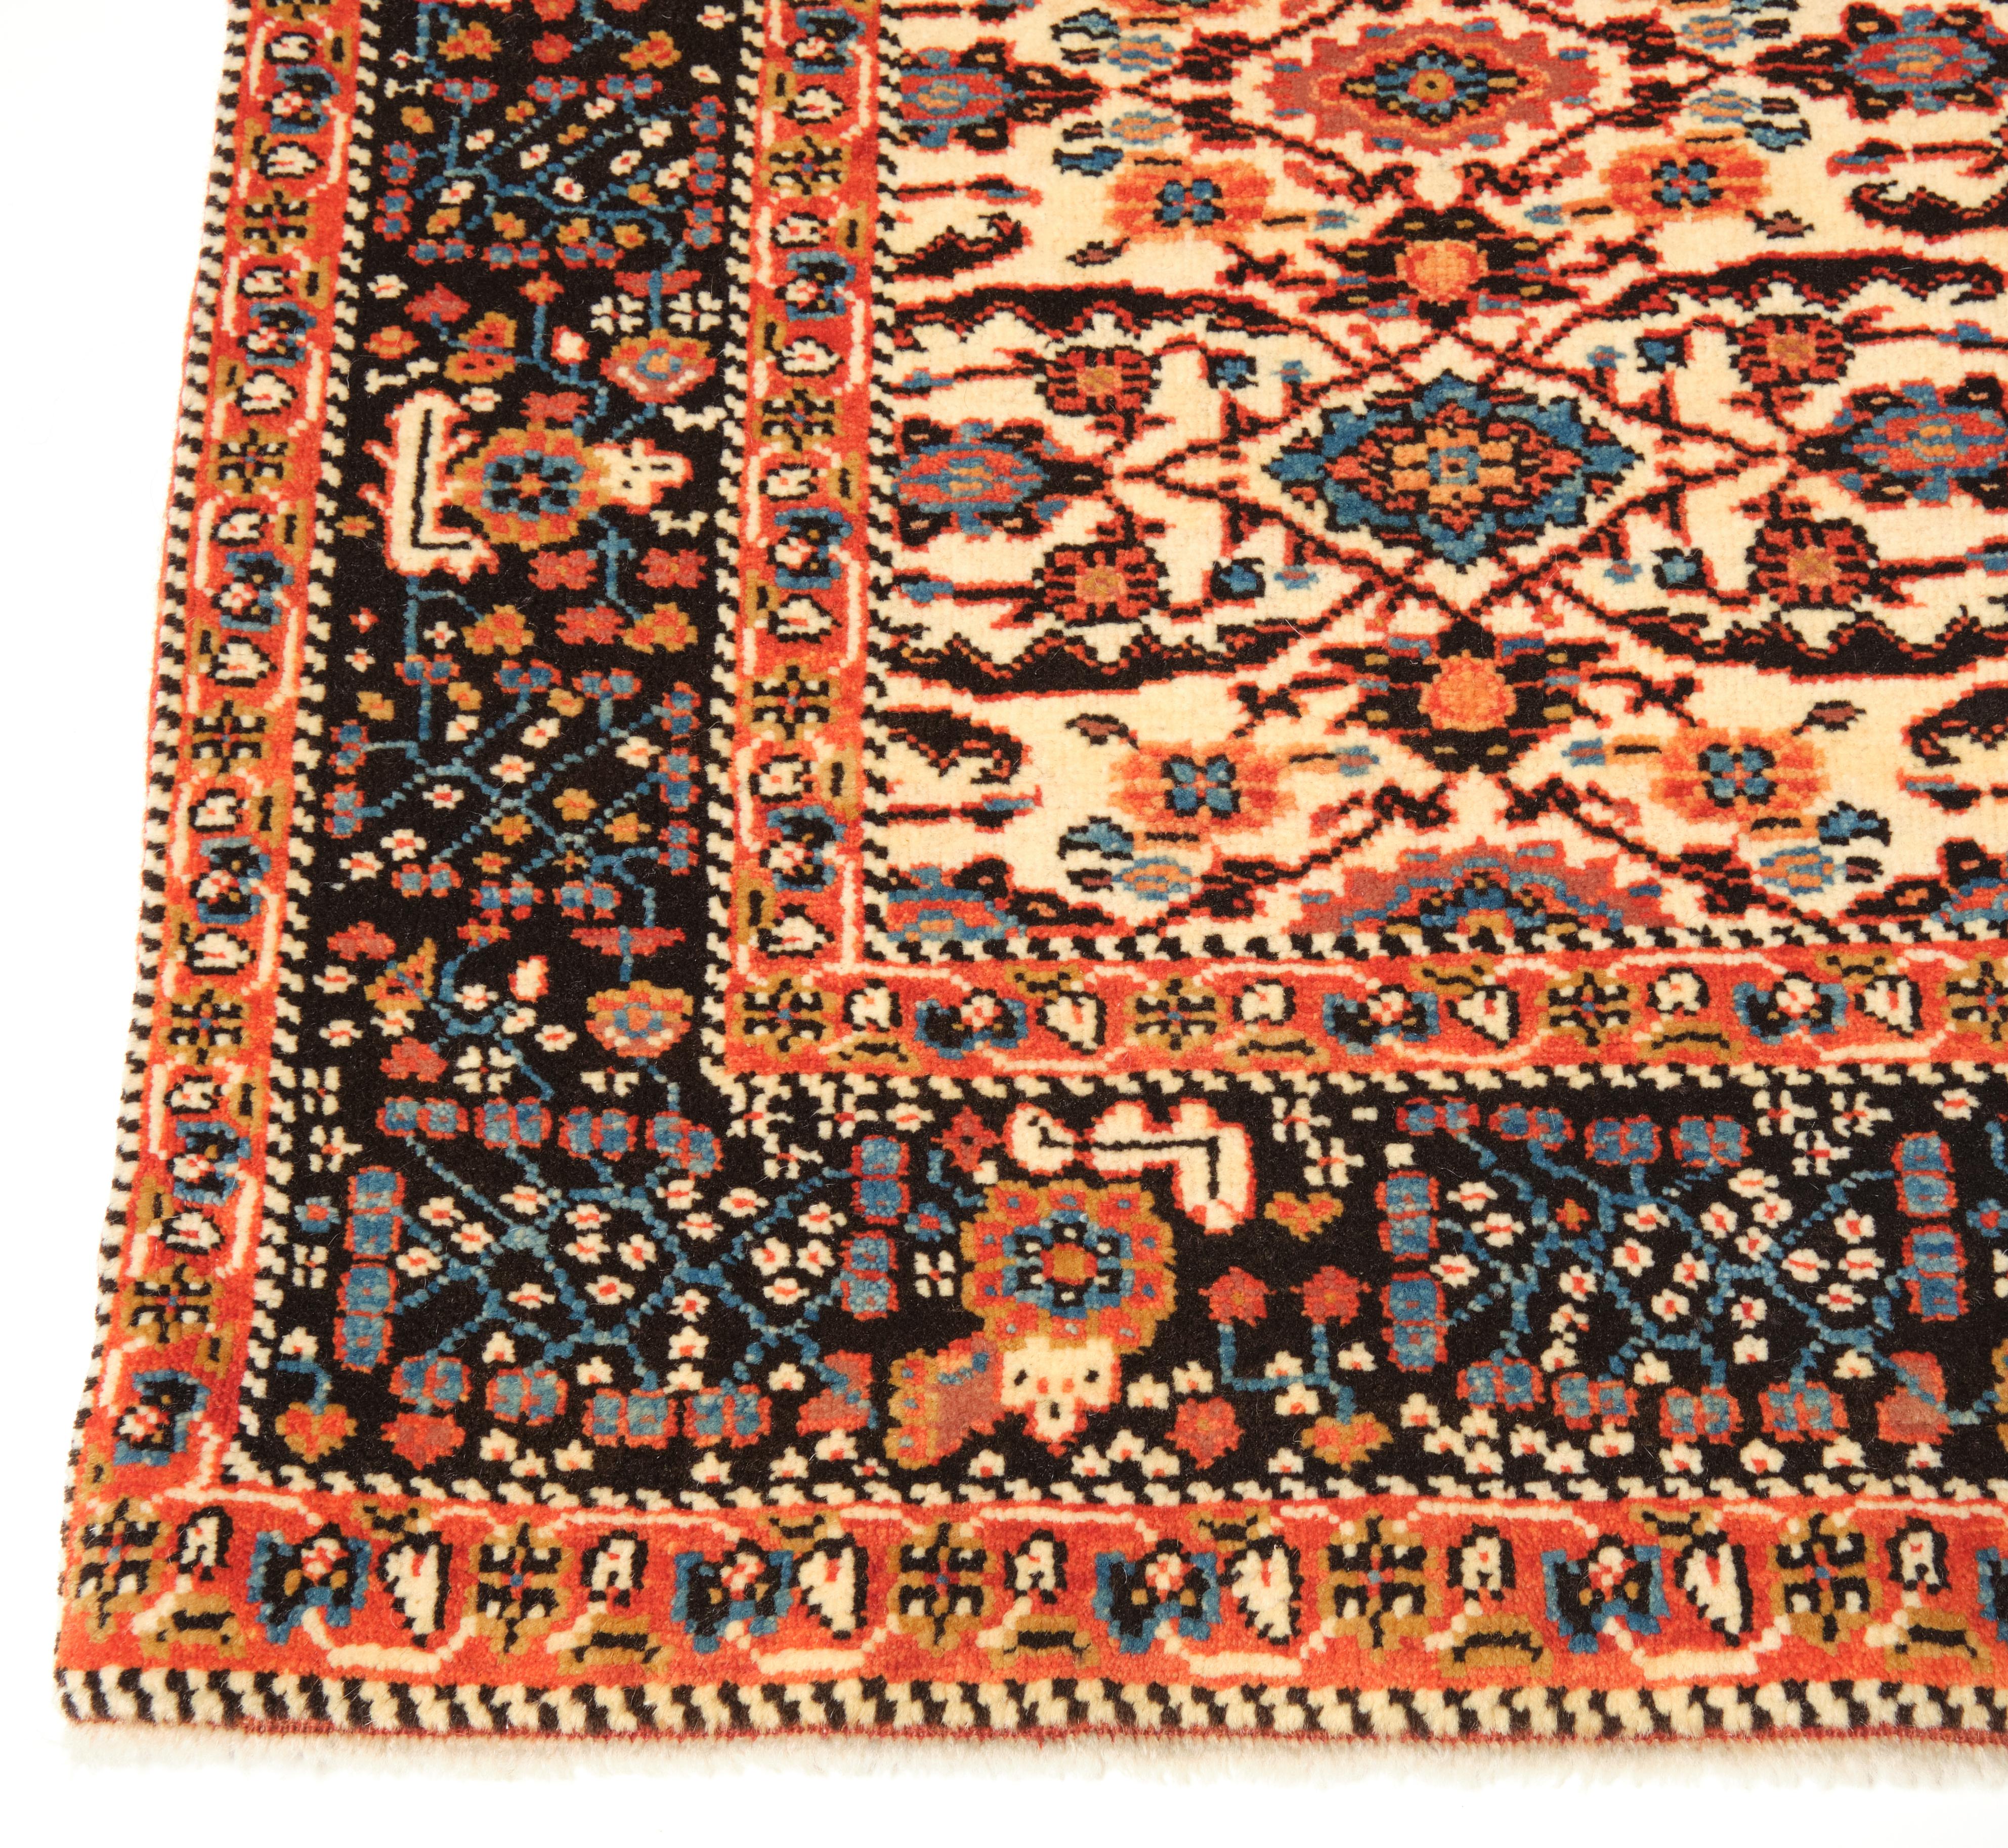 The source of the rug comes from the book Antique Rugs of Kurdistan A Historical Legacy of Woven Art, James D. Burns, 2002 nr.29. This white background rug is associated with bridal dowry weavings from Senna, Eastern Kurdistan area early 19th